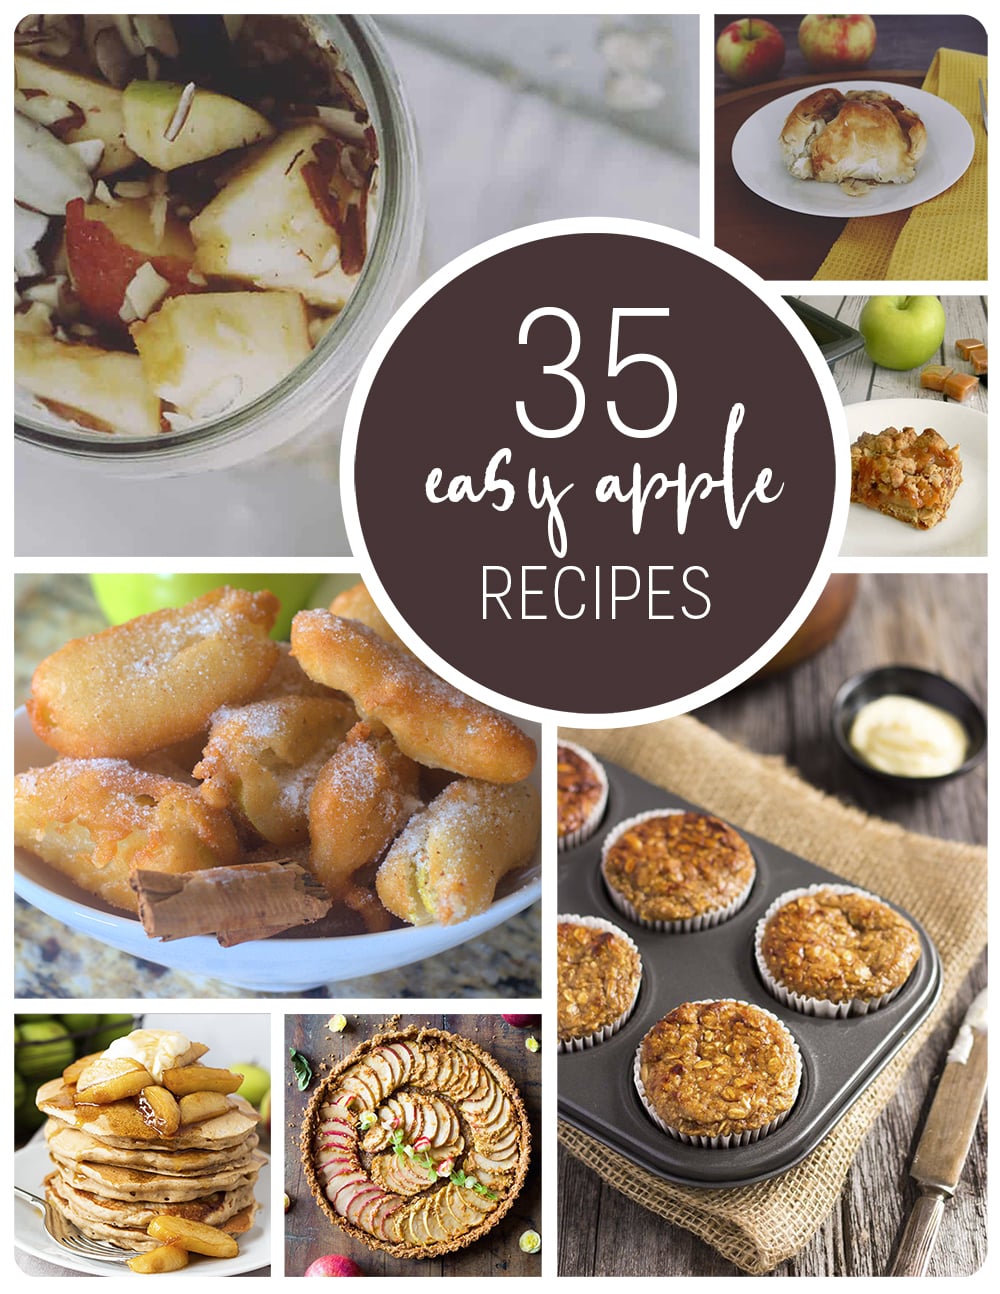 Jump into fall with these delectable and easy apple recipes! Great for fall celebrations, fall parties, or a nice fall meal!